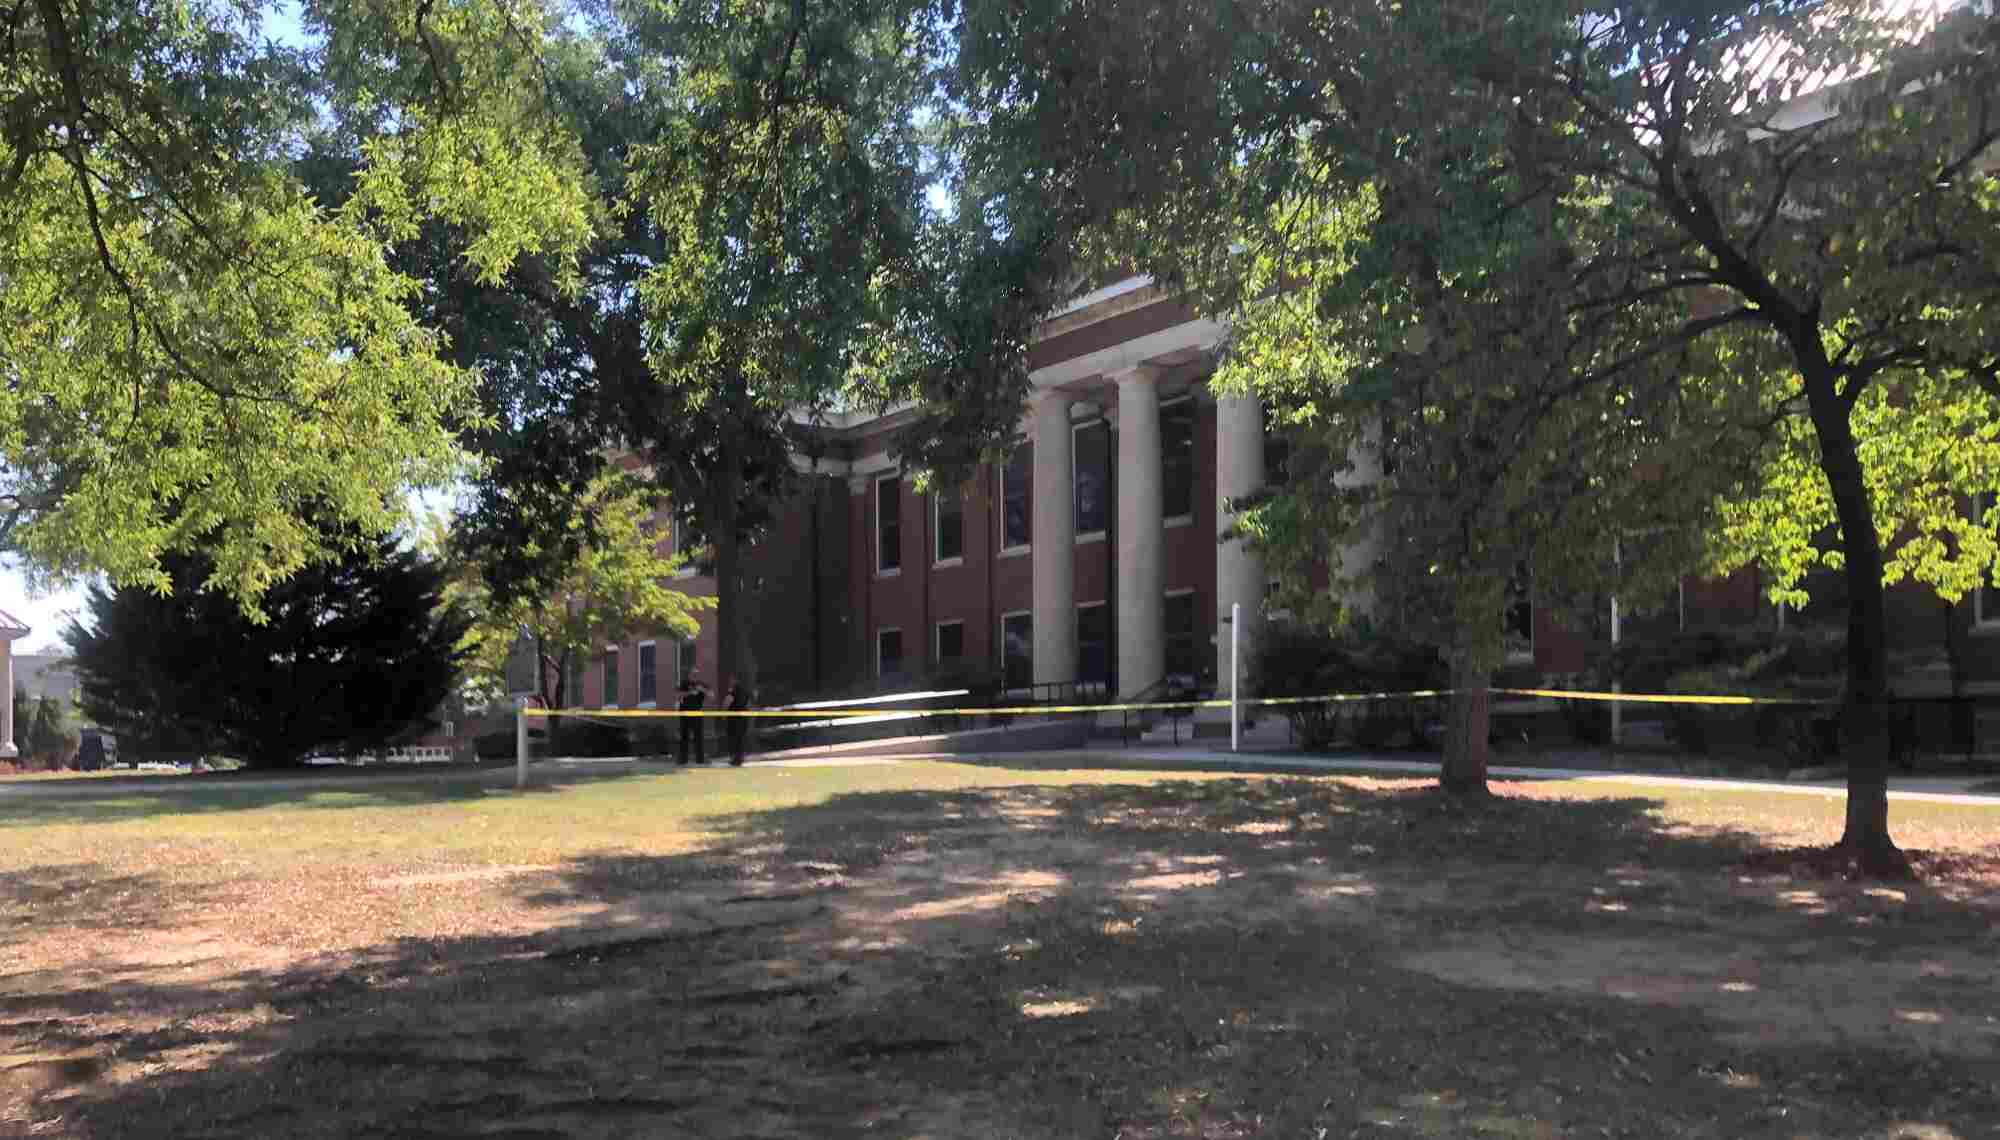 Shots fired at courthouse in northeast Alabama